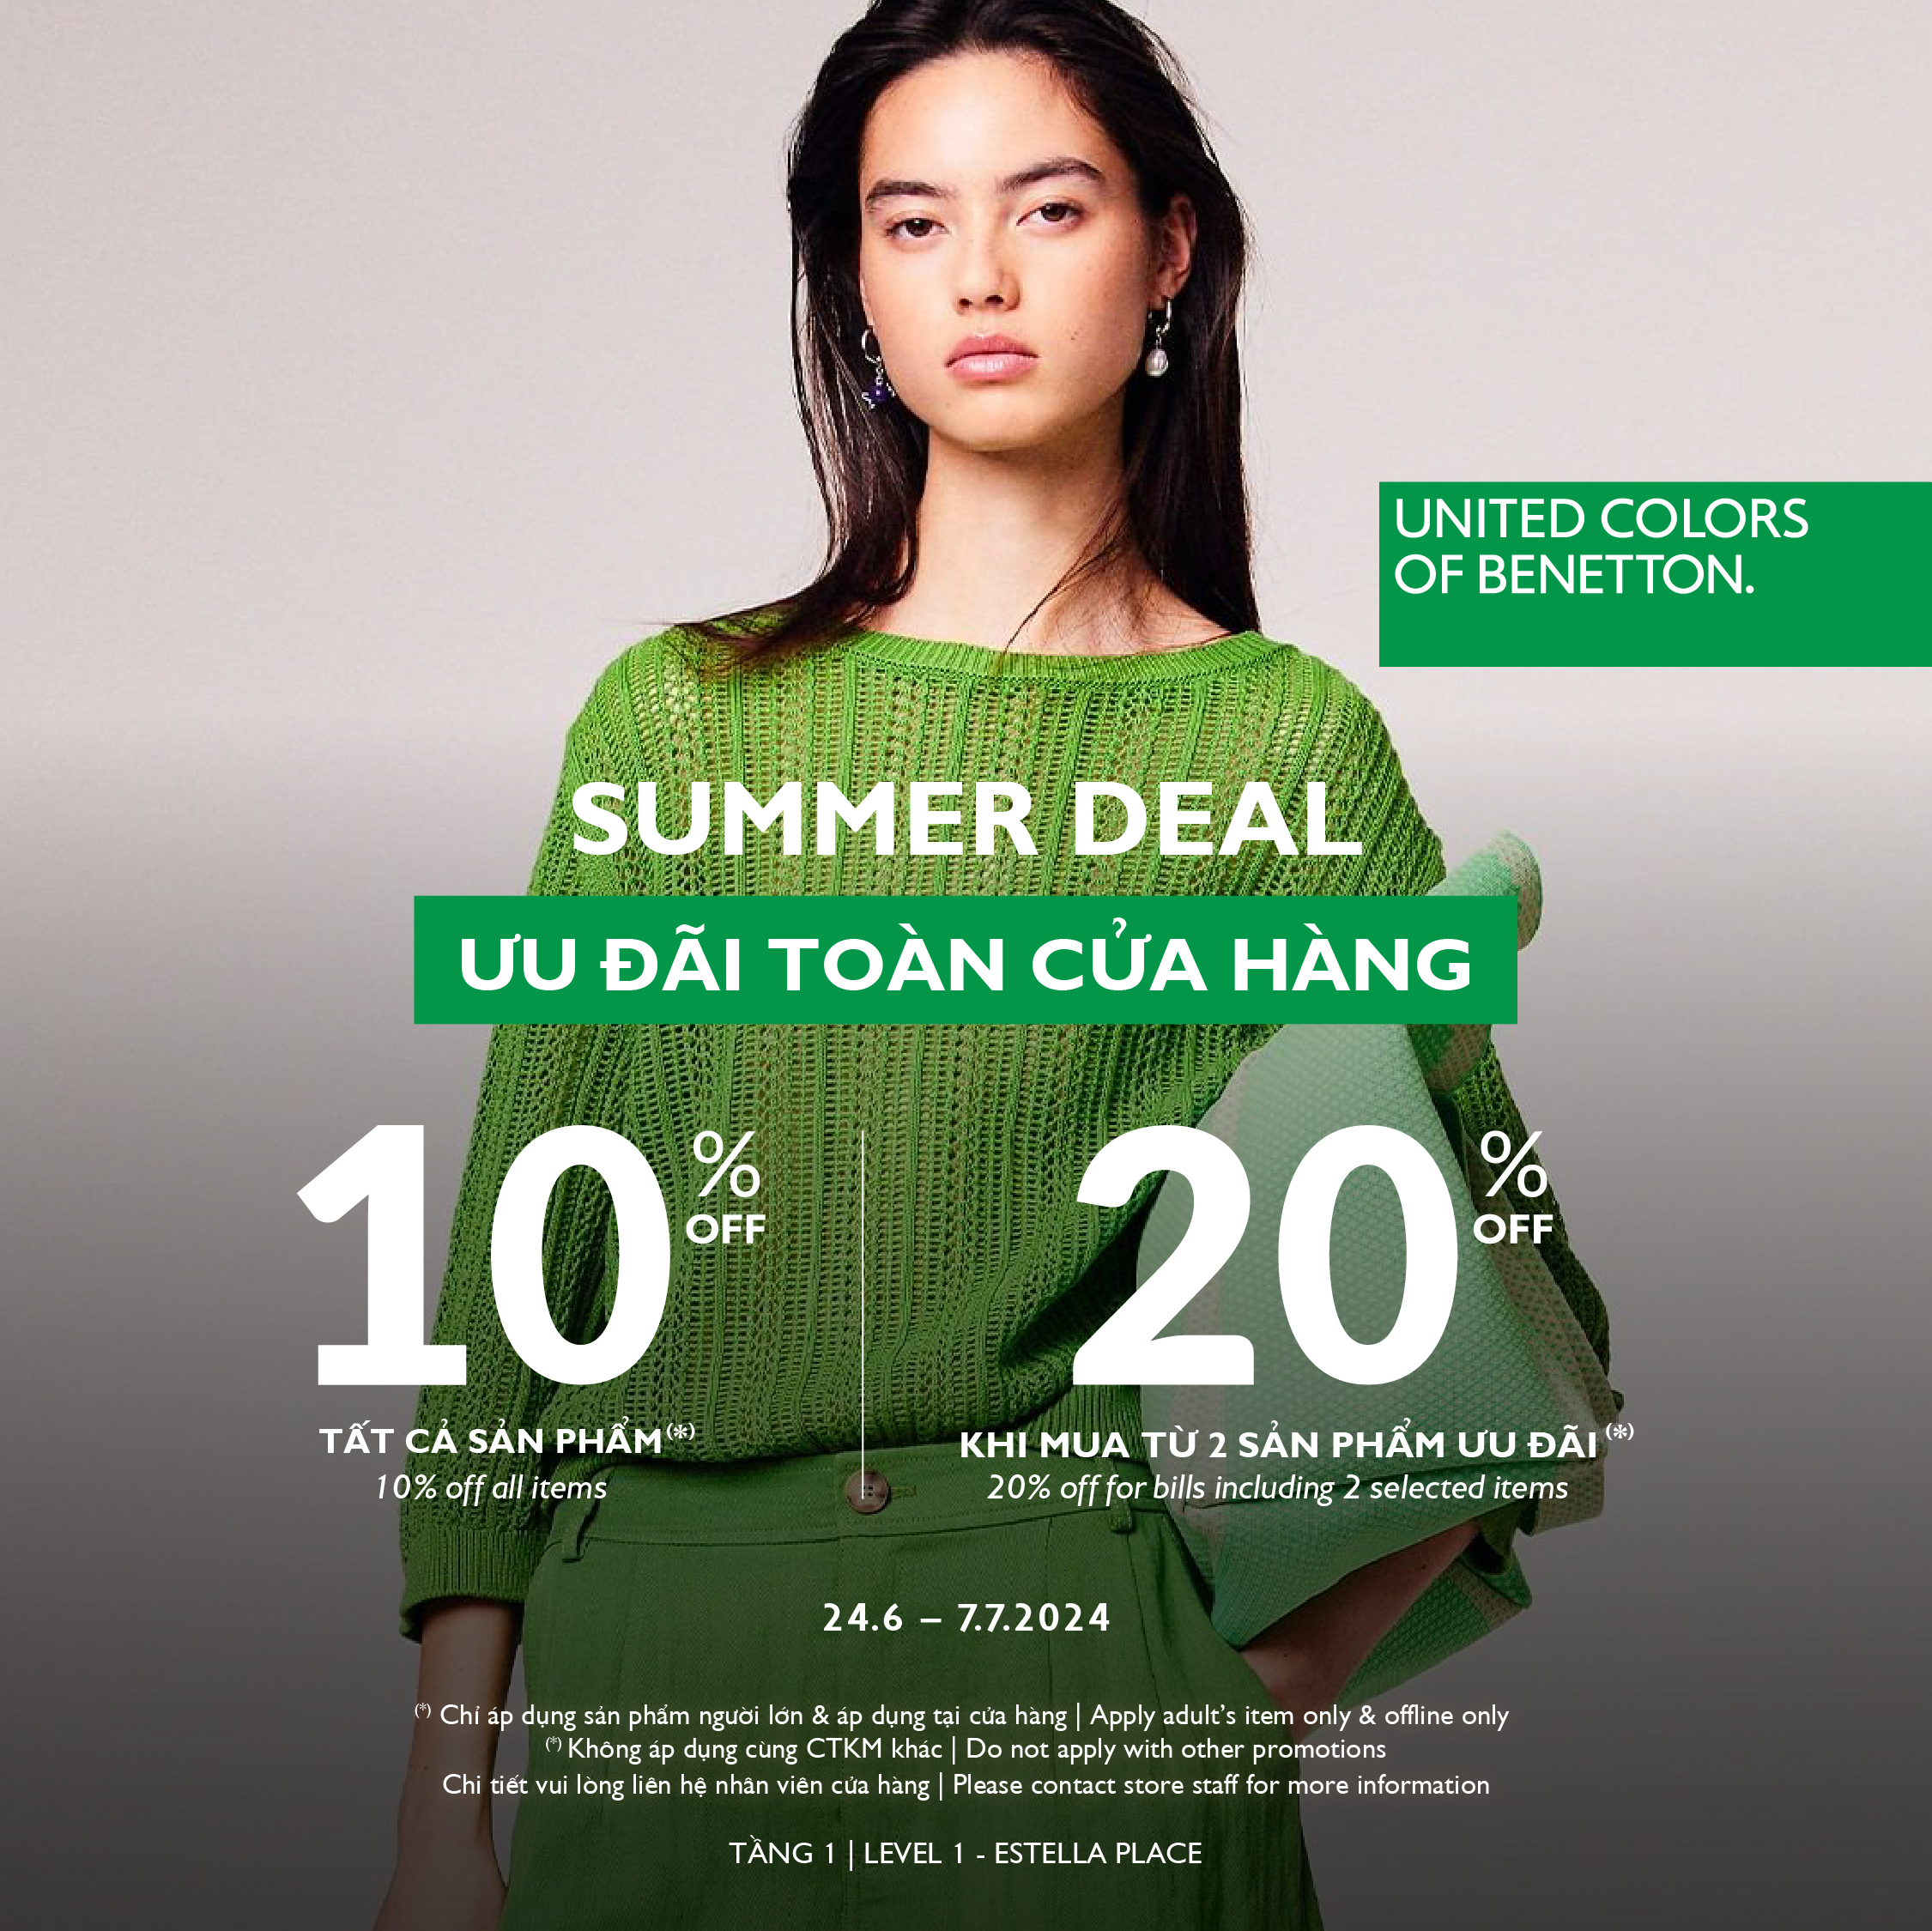 𝗨𝗡𝗜𝗧𝗘𝗗 𝗖𝗢𝗟𝗢𝗥𝗦 𝗢𝗙 𝗕𝗘𝗡𝗘𝗧𝗧𝗢𝗡 - SUMMER DEAL - SALE UP TO 20% ALL ITEMS